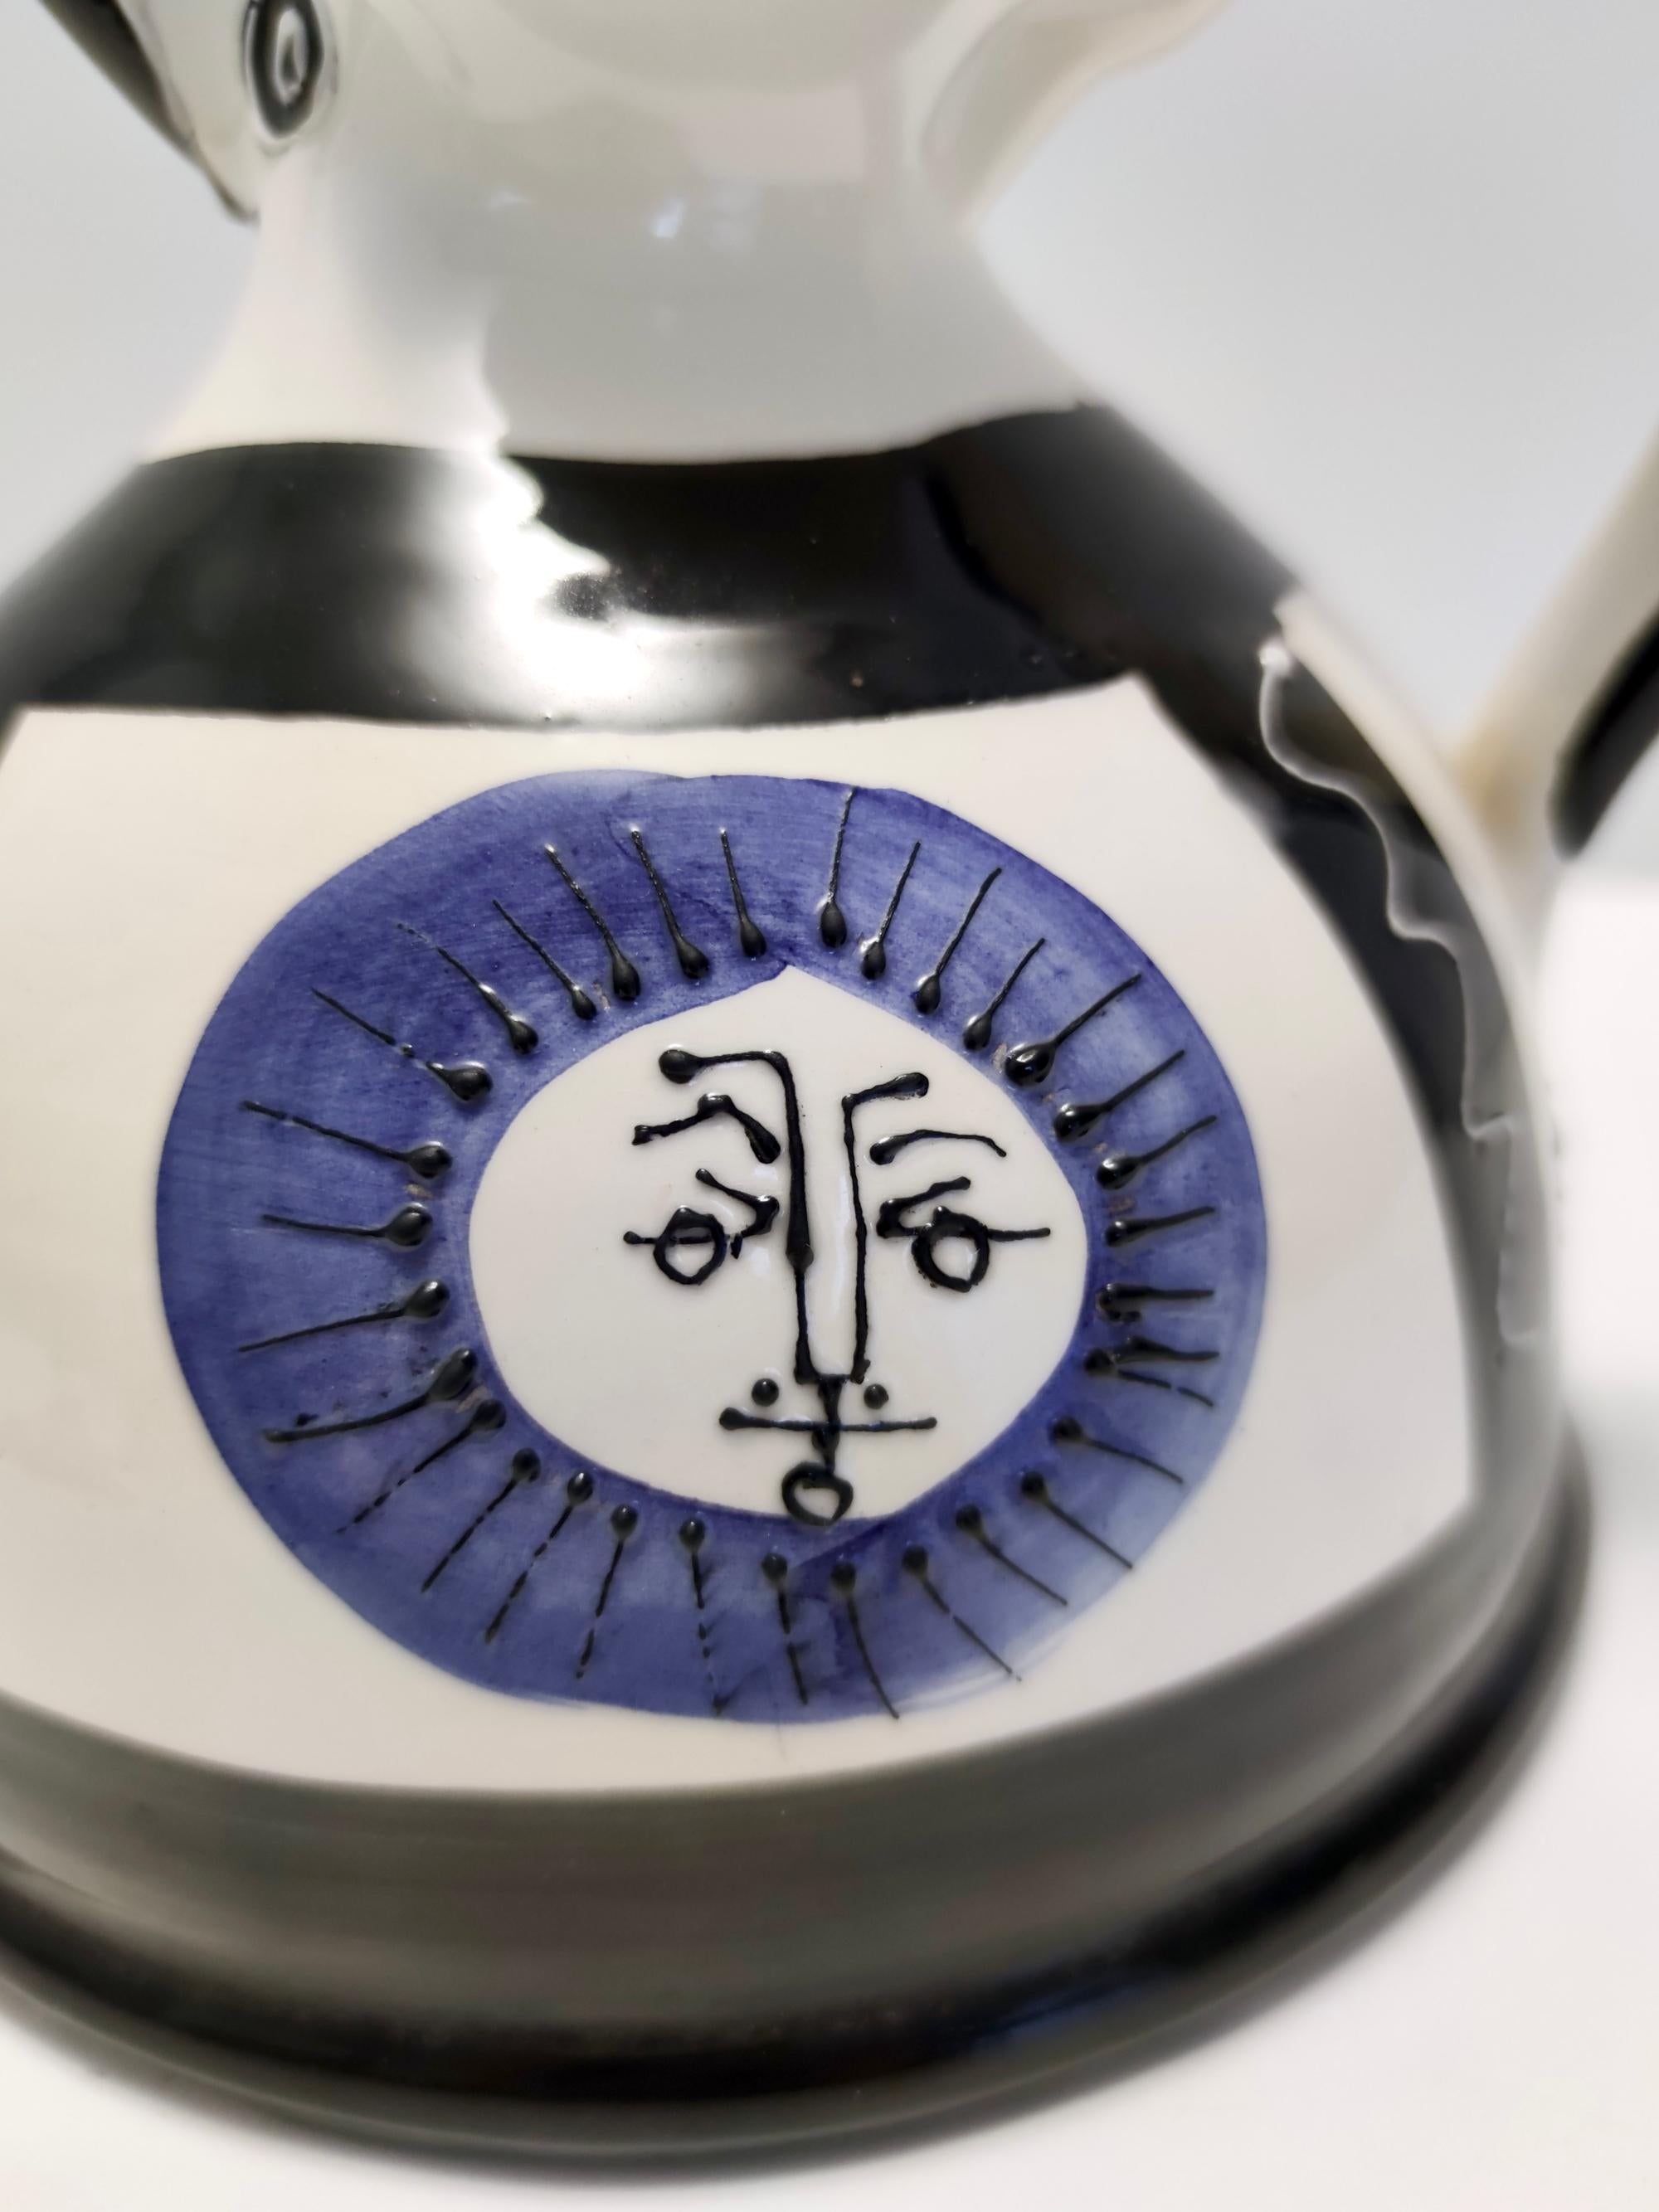 White, Black and Blue Hand-Painted Ceramic Jug / Vase in the Style of Picasso For Sale 2